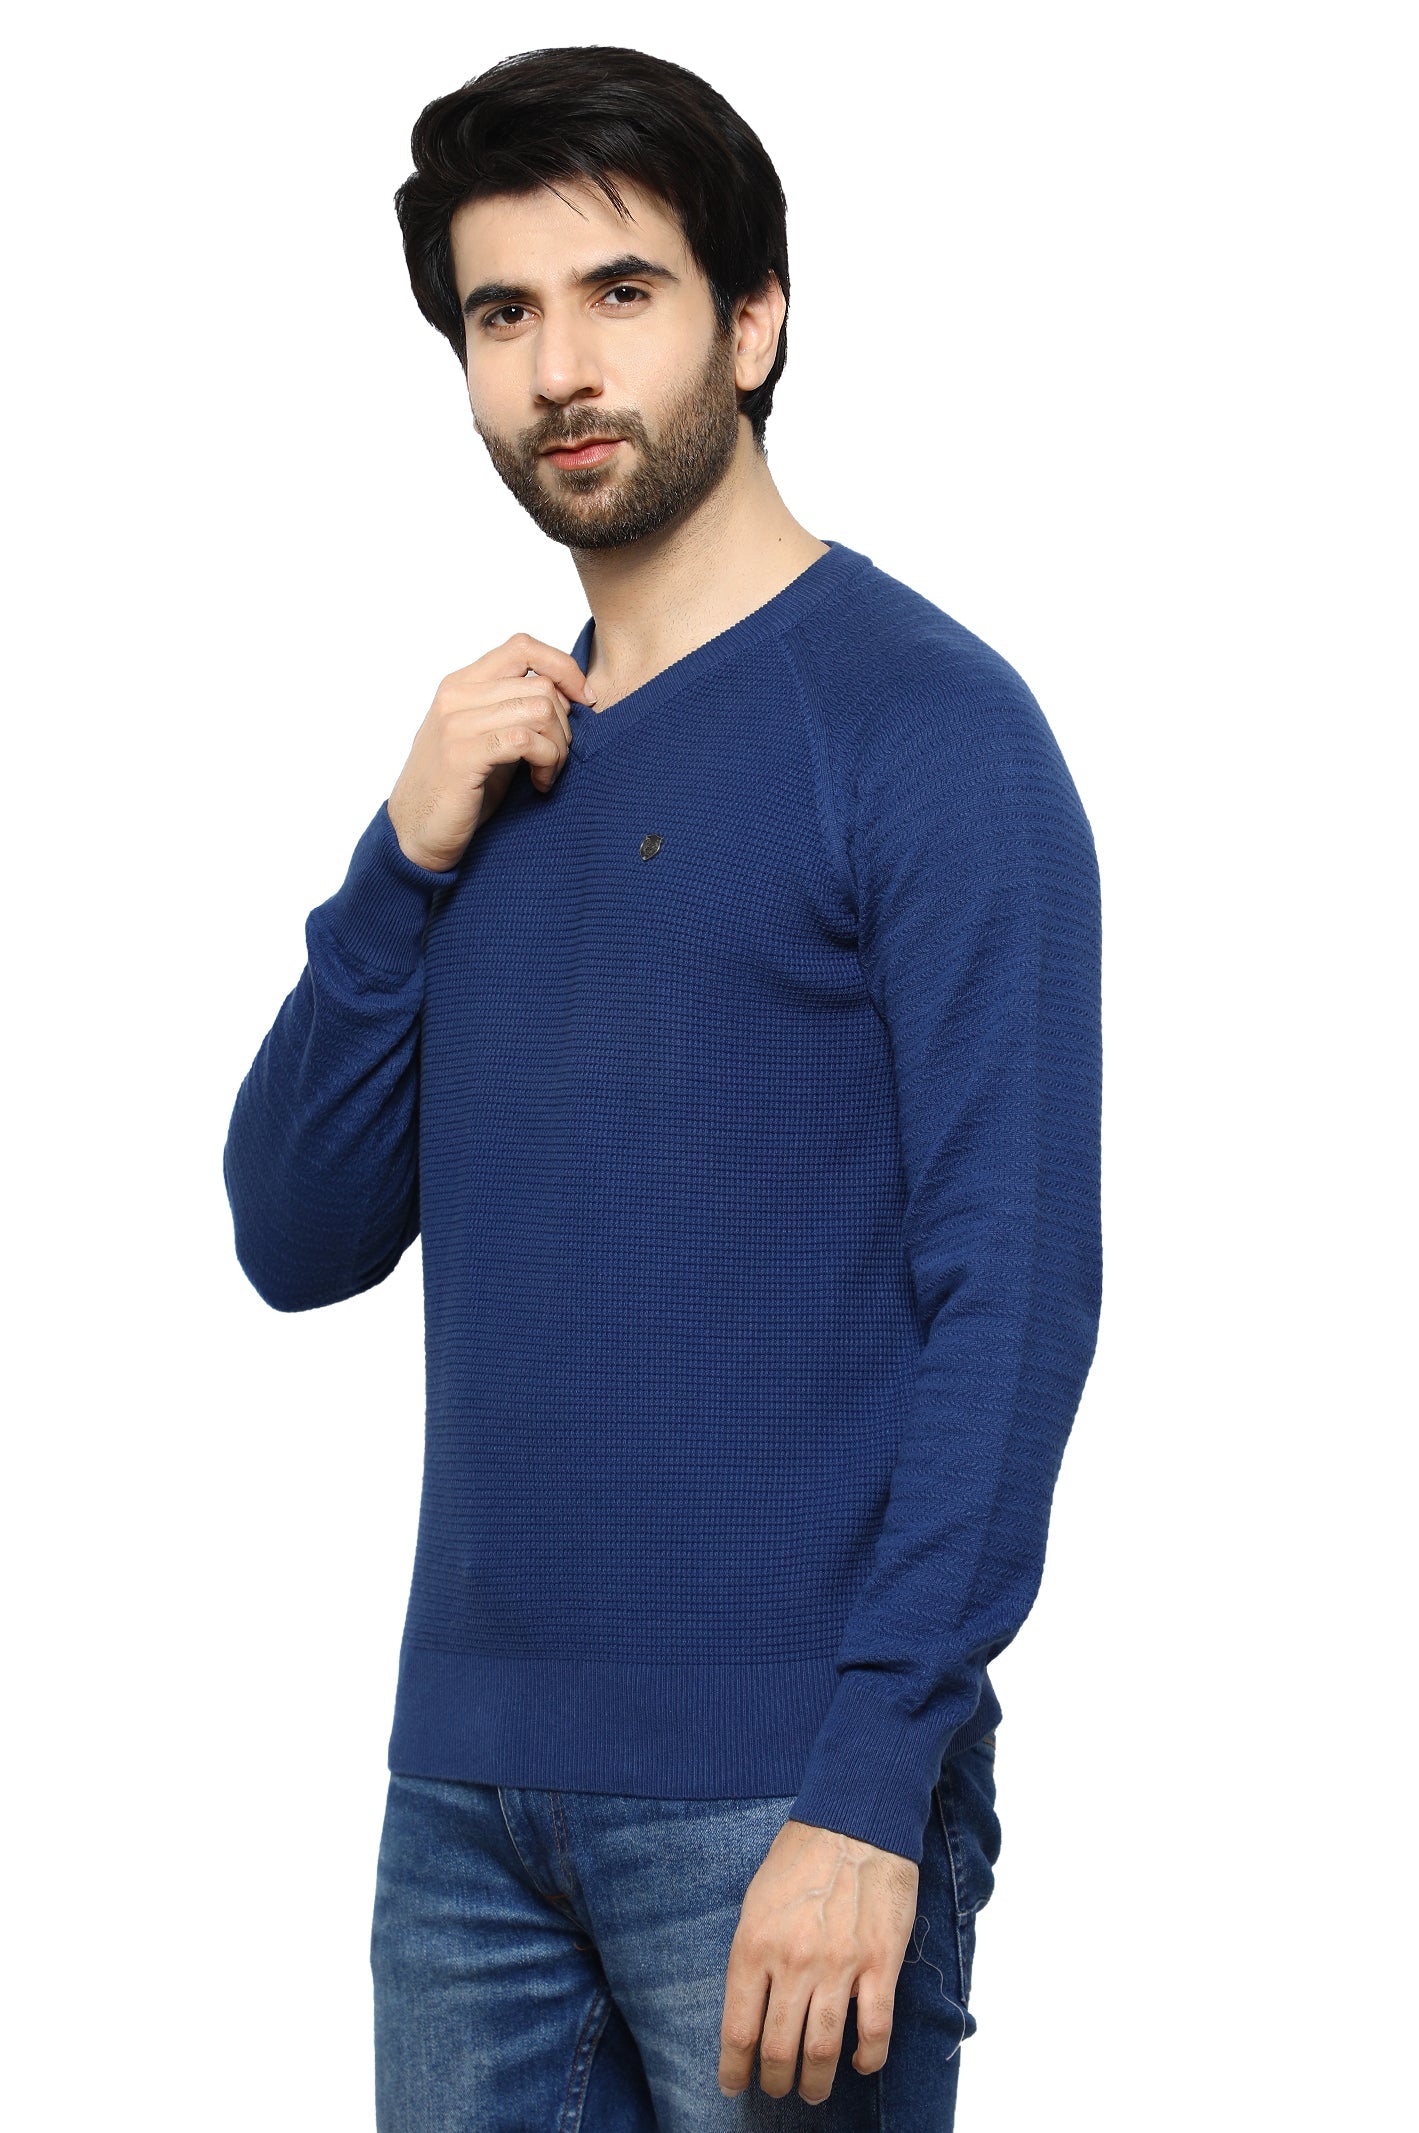 Sweater for Men's – Diners Pakistan